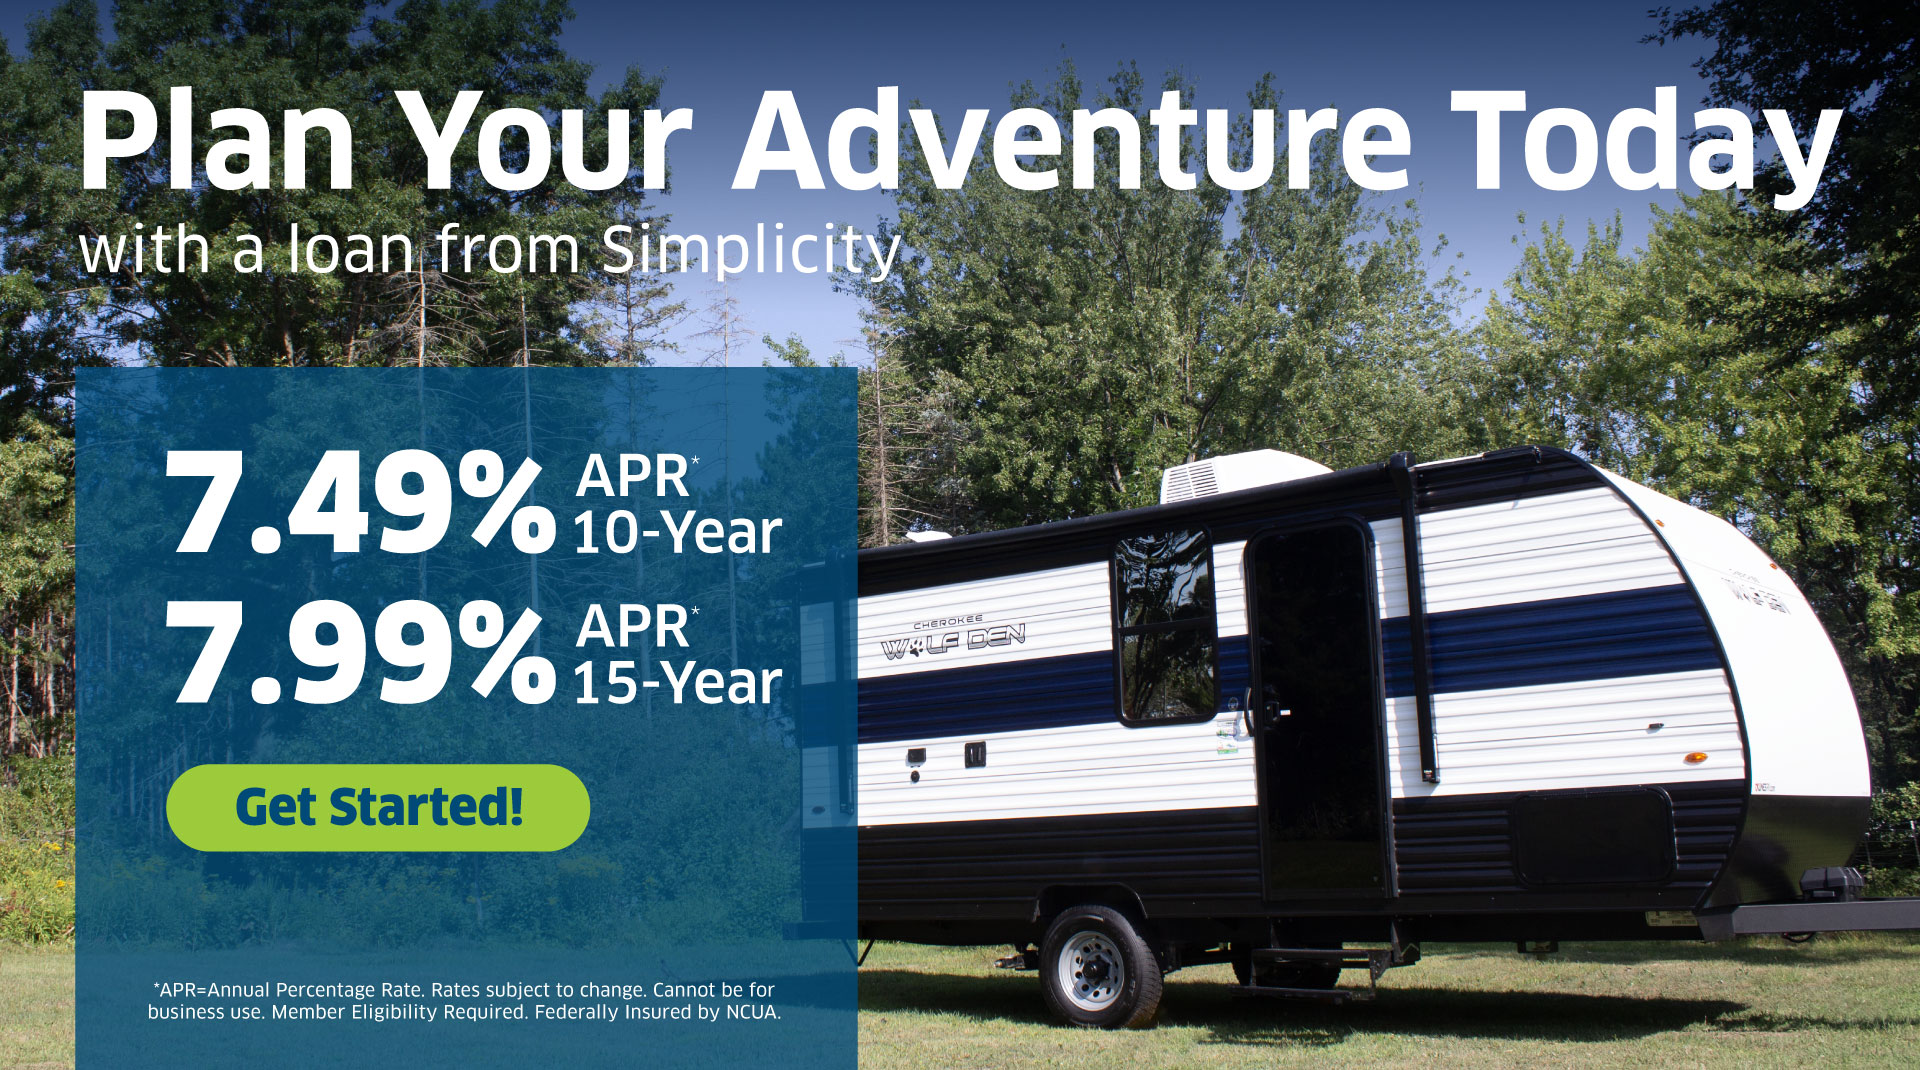 Plan Your Adventure Today with a loan from Simplicity! Get Started